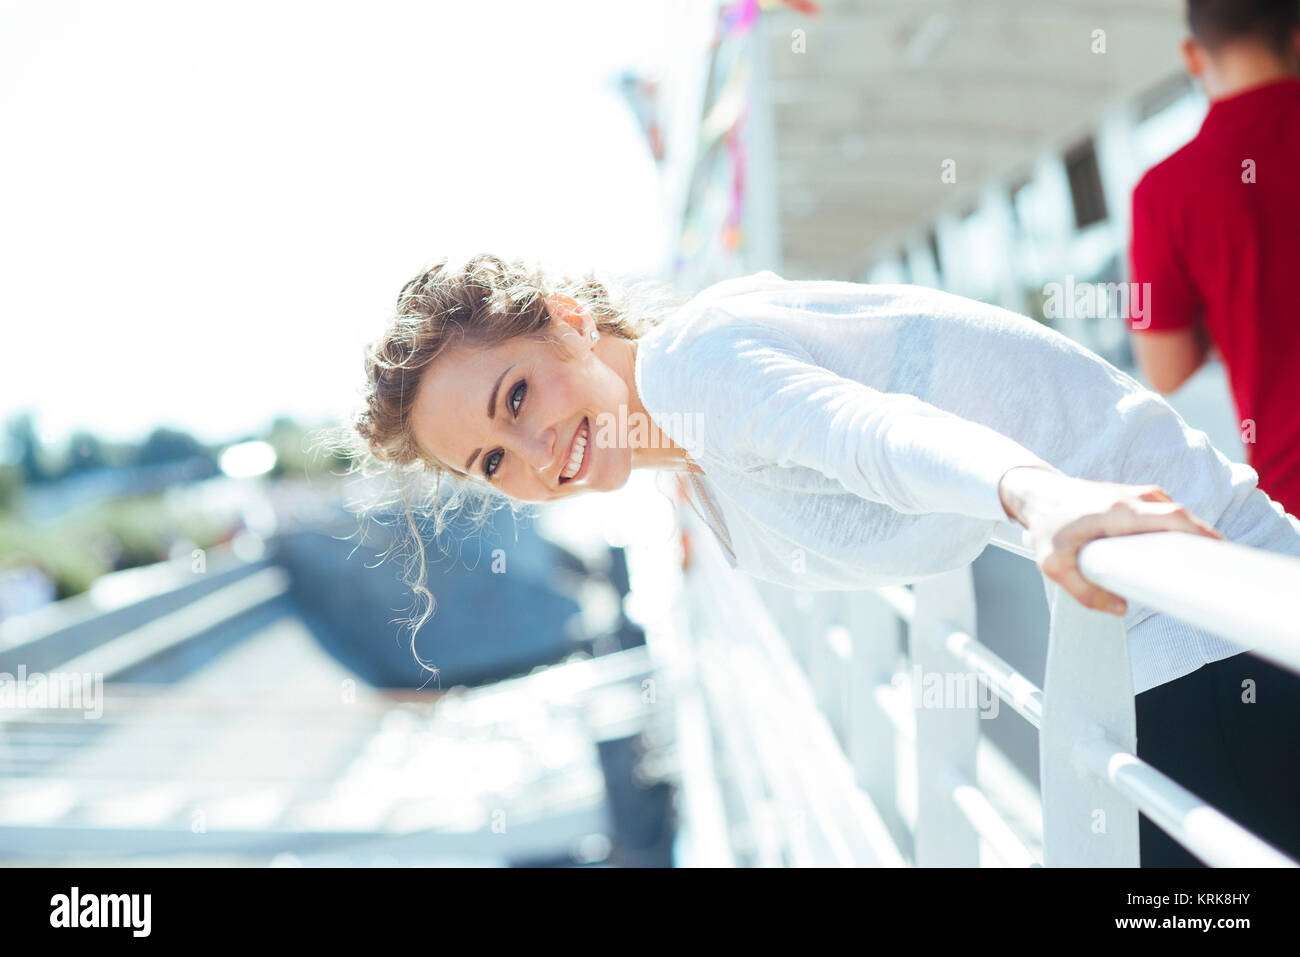 Smiling Caucasian woman leaning over railing Banque D'Images